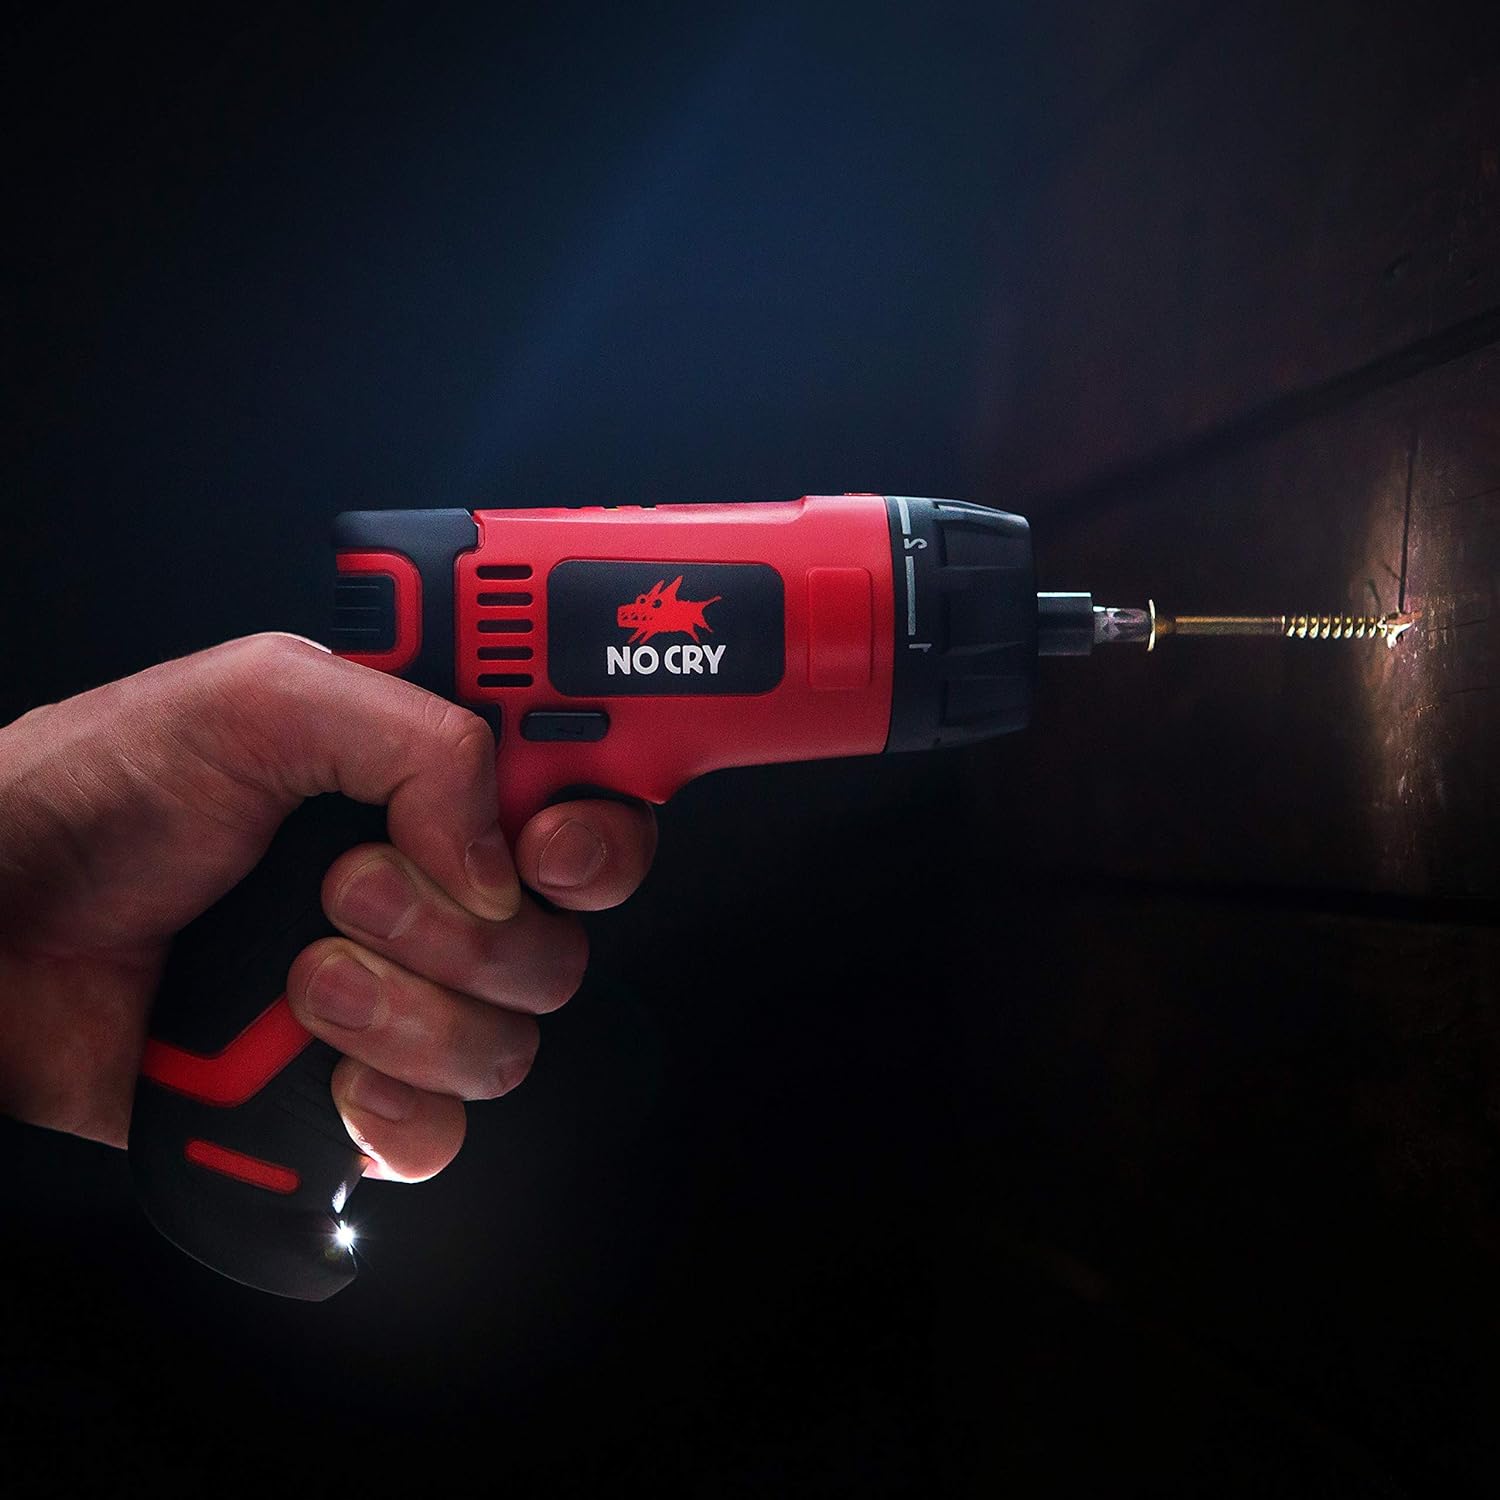 NoCry 10 N.m Cordless Electric Screwdriver - with 30 Screw Bits Set, Rechargeable 7.2 Volt Lithium Ion Battery and a Built-In LED Lig